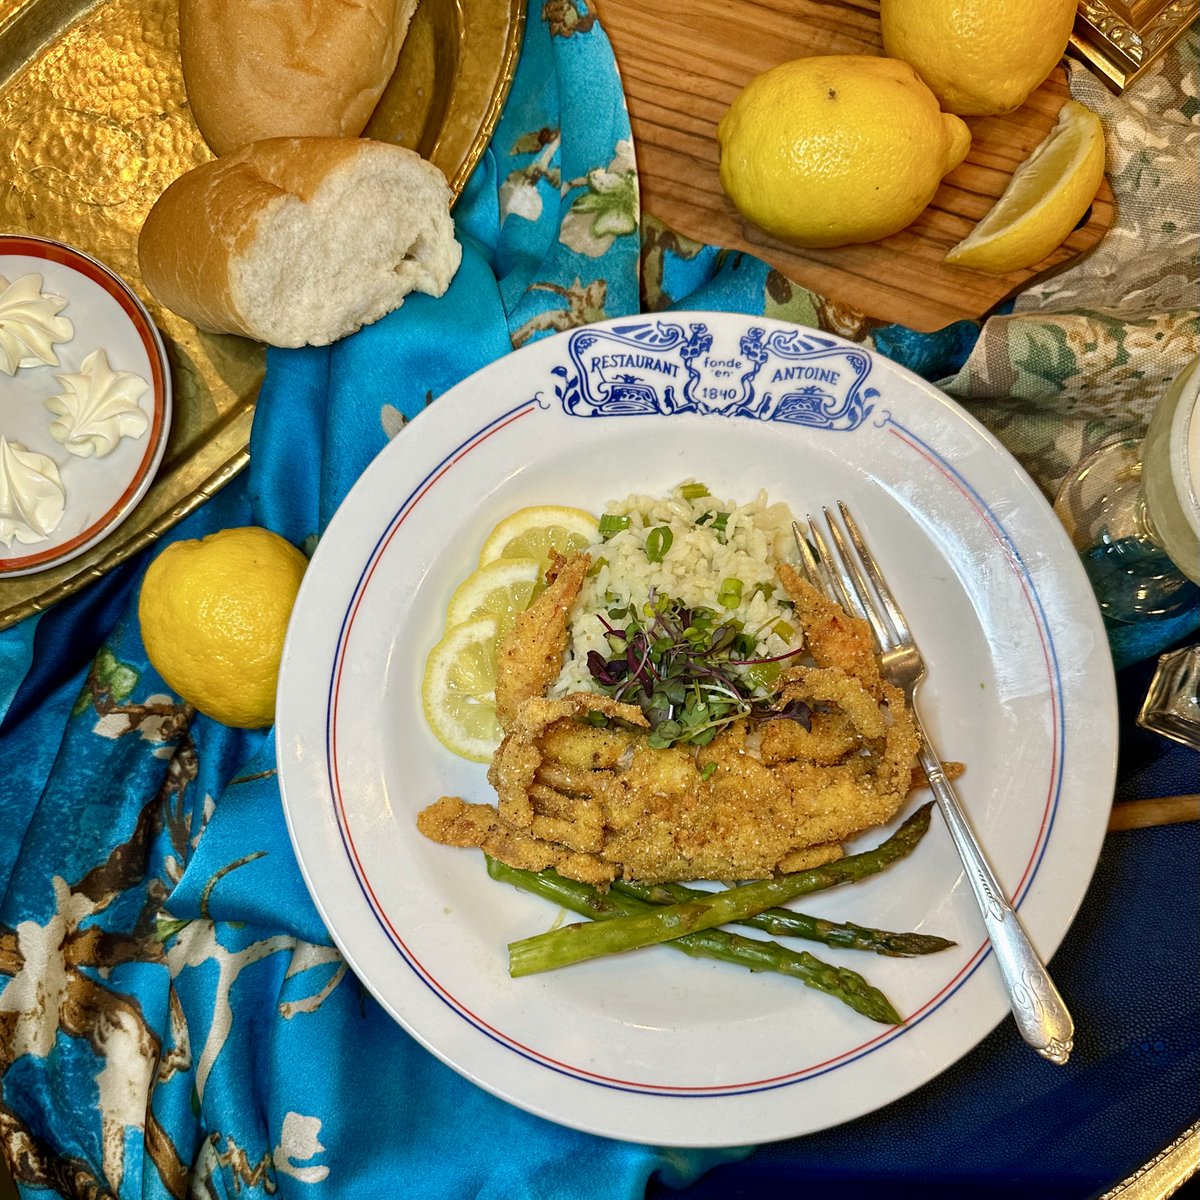 Enjoy our Soft Shell Crab Meuniere from our Spring Lunch Special Menu Mondays, Thursday & Fridays 10:30am-2pm. Walk-ins, welcomed. Reservations, recommended. #antoines1840 #antoinesnola #softshellcrab #lunch #nolalunch #neworleanslunch #lunchtime #frenchquarterlunch #seafood